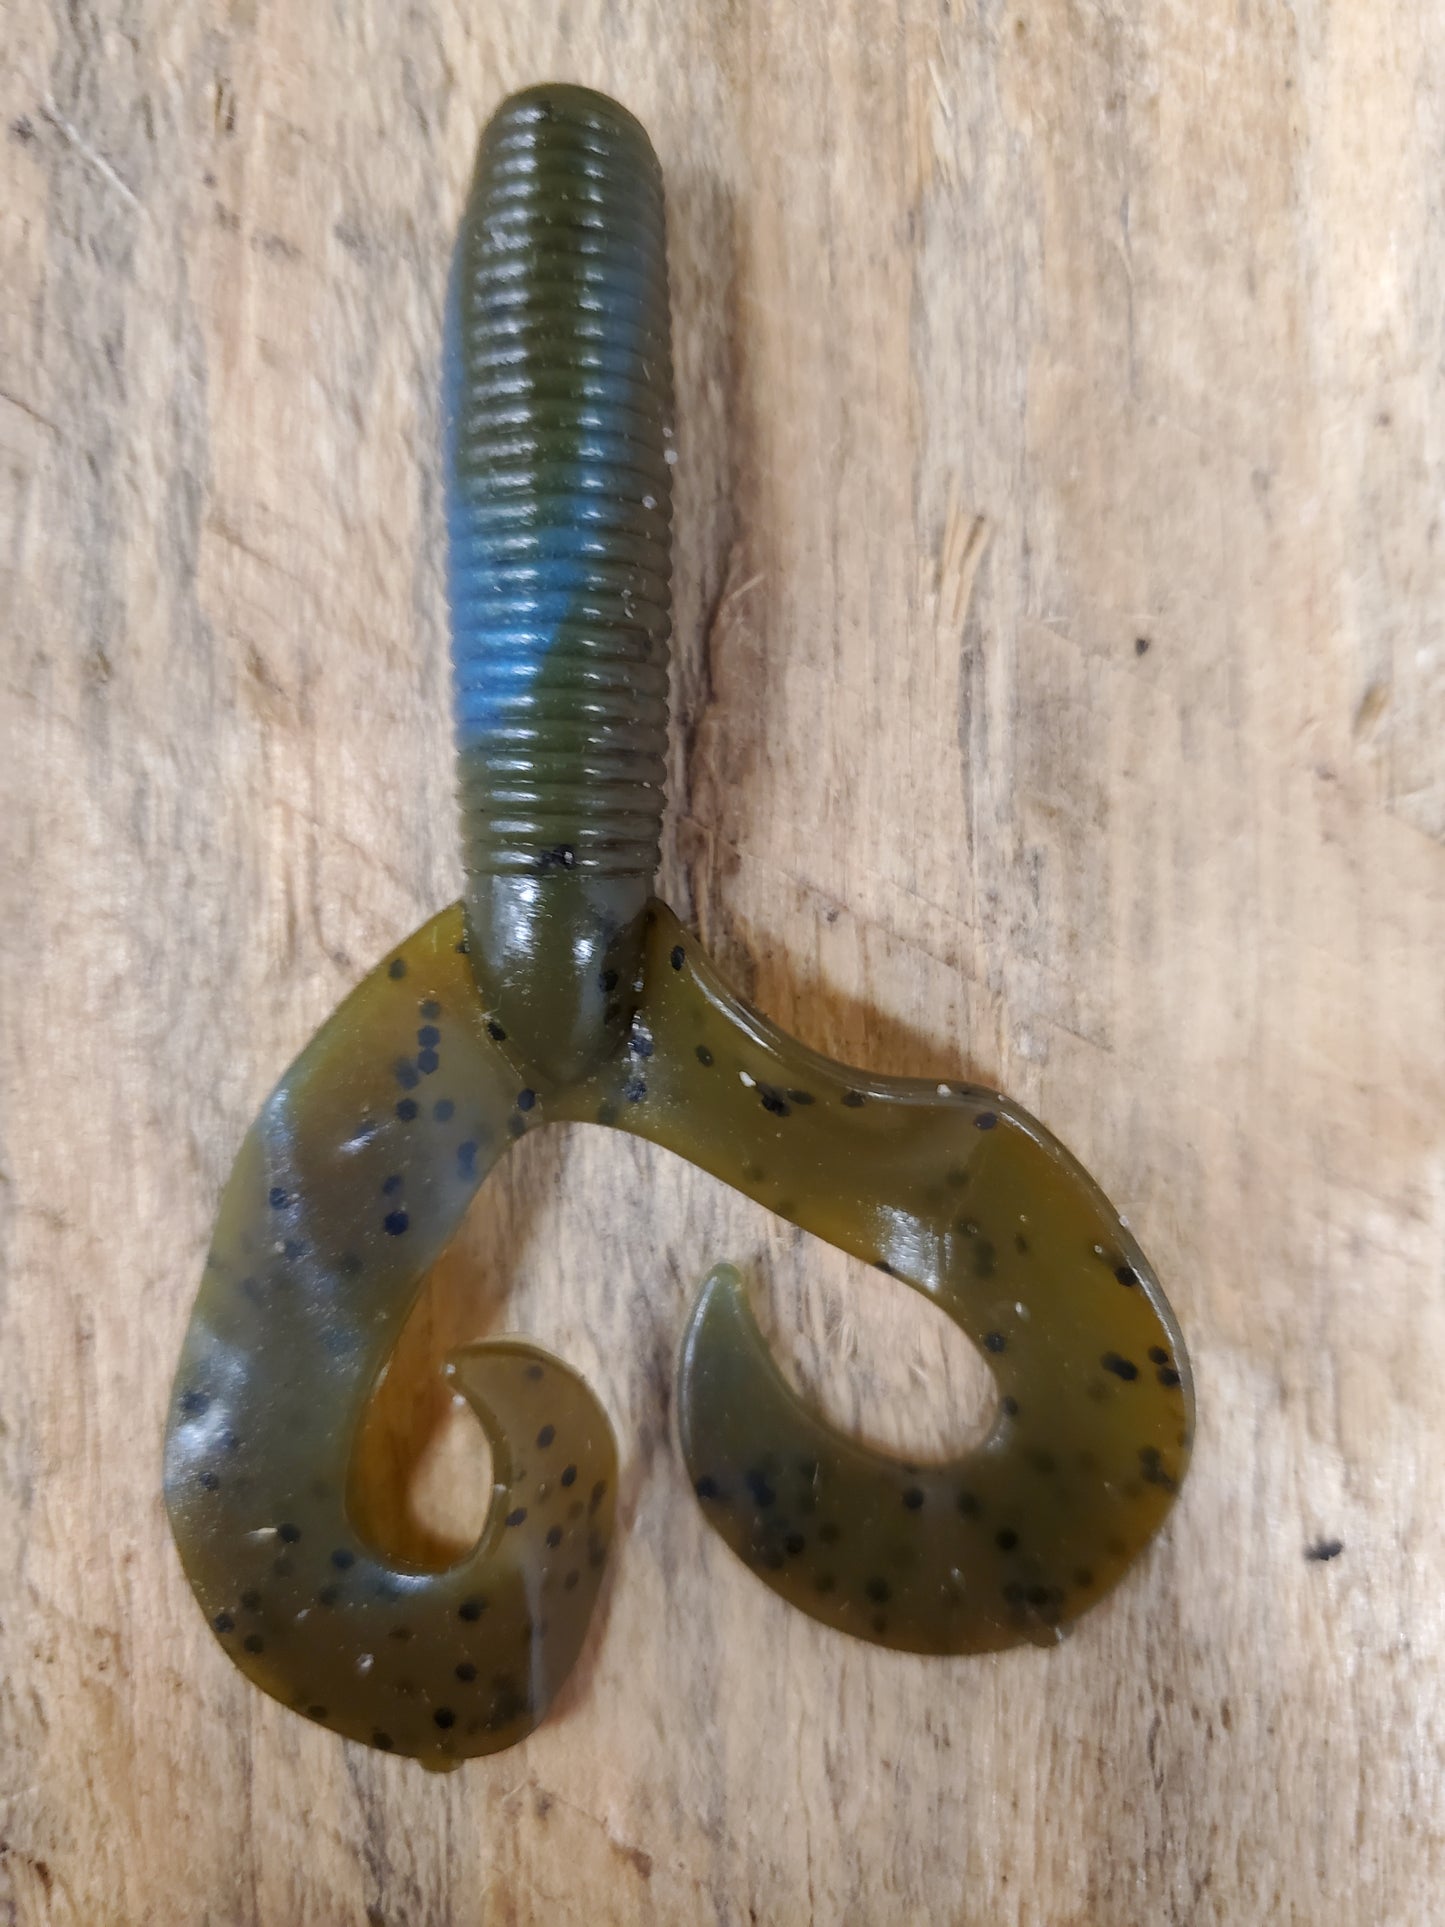 Double Tail 3" Finesse Grub